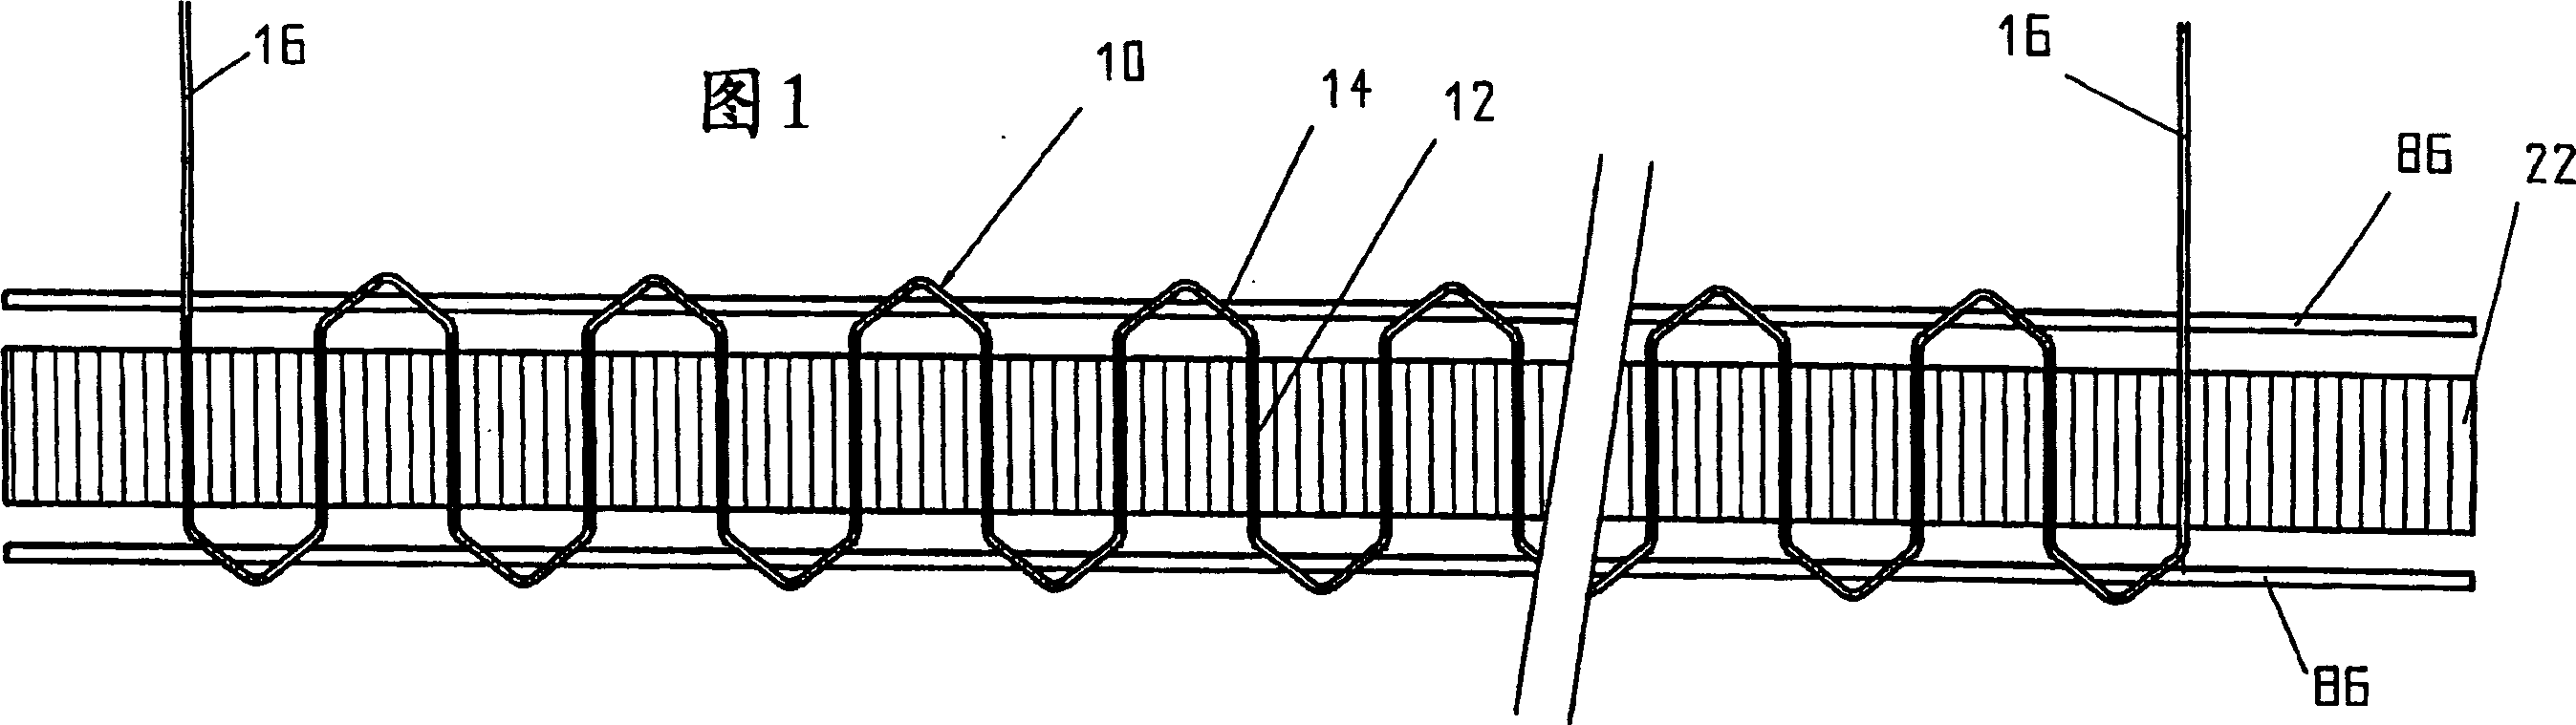 Method and device for forming wave windings for rotor and stator cores of electric machines